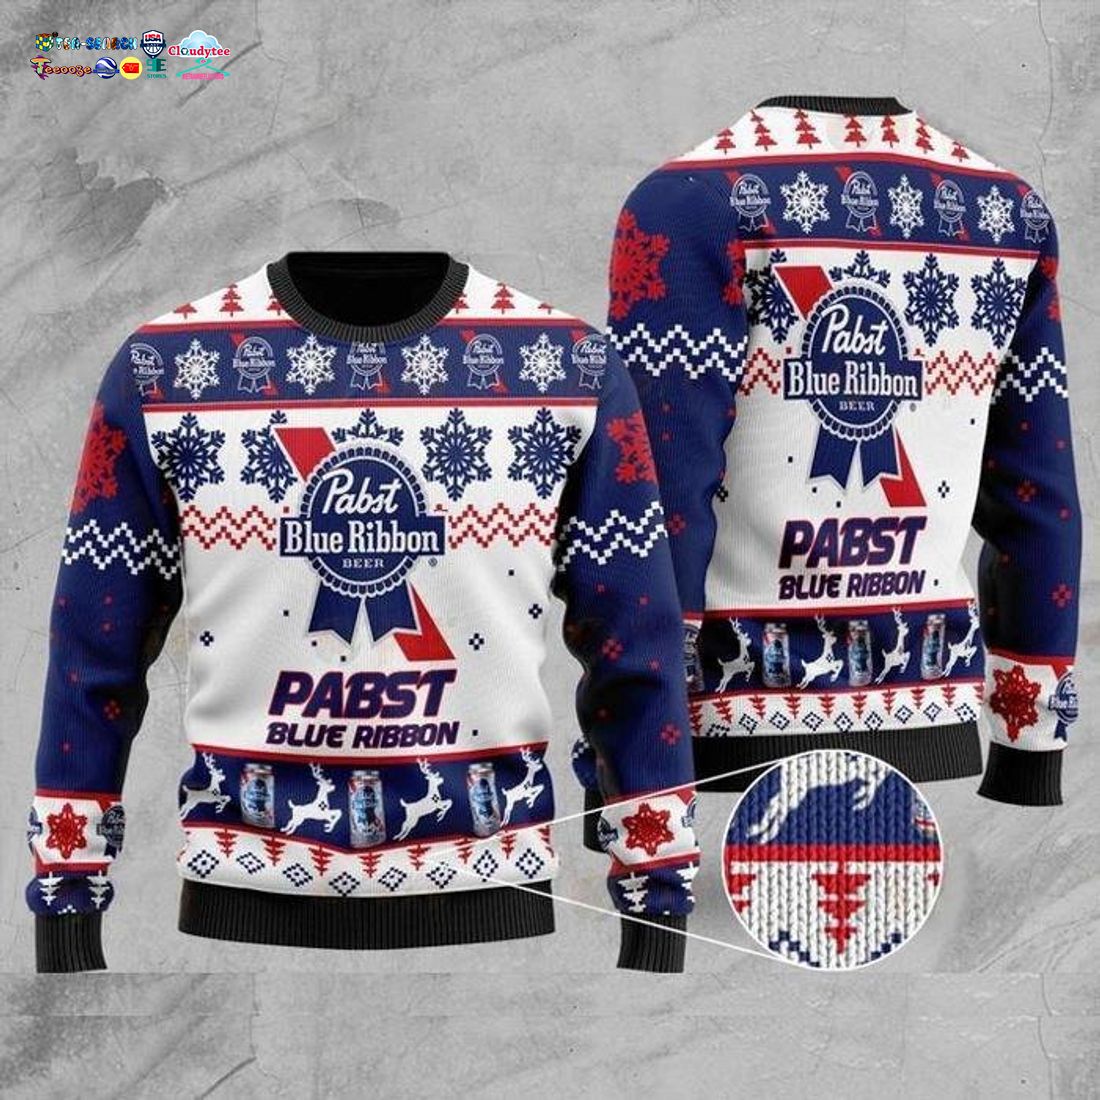 Pabst Blue Ribbon Ver 2 Ugly Christmas Sweater